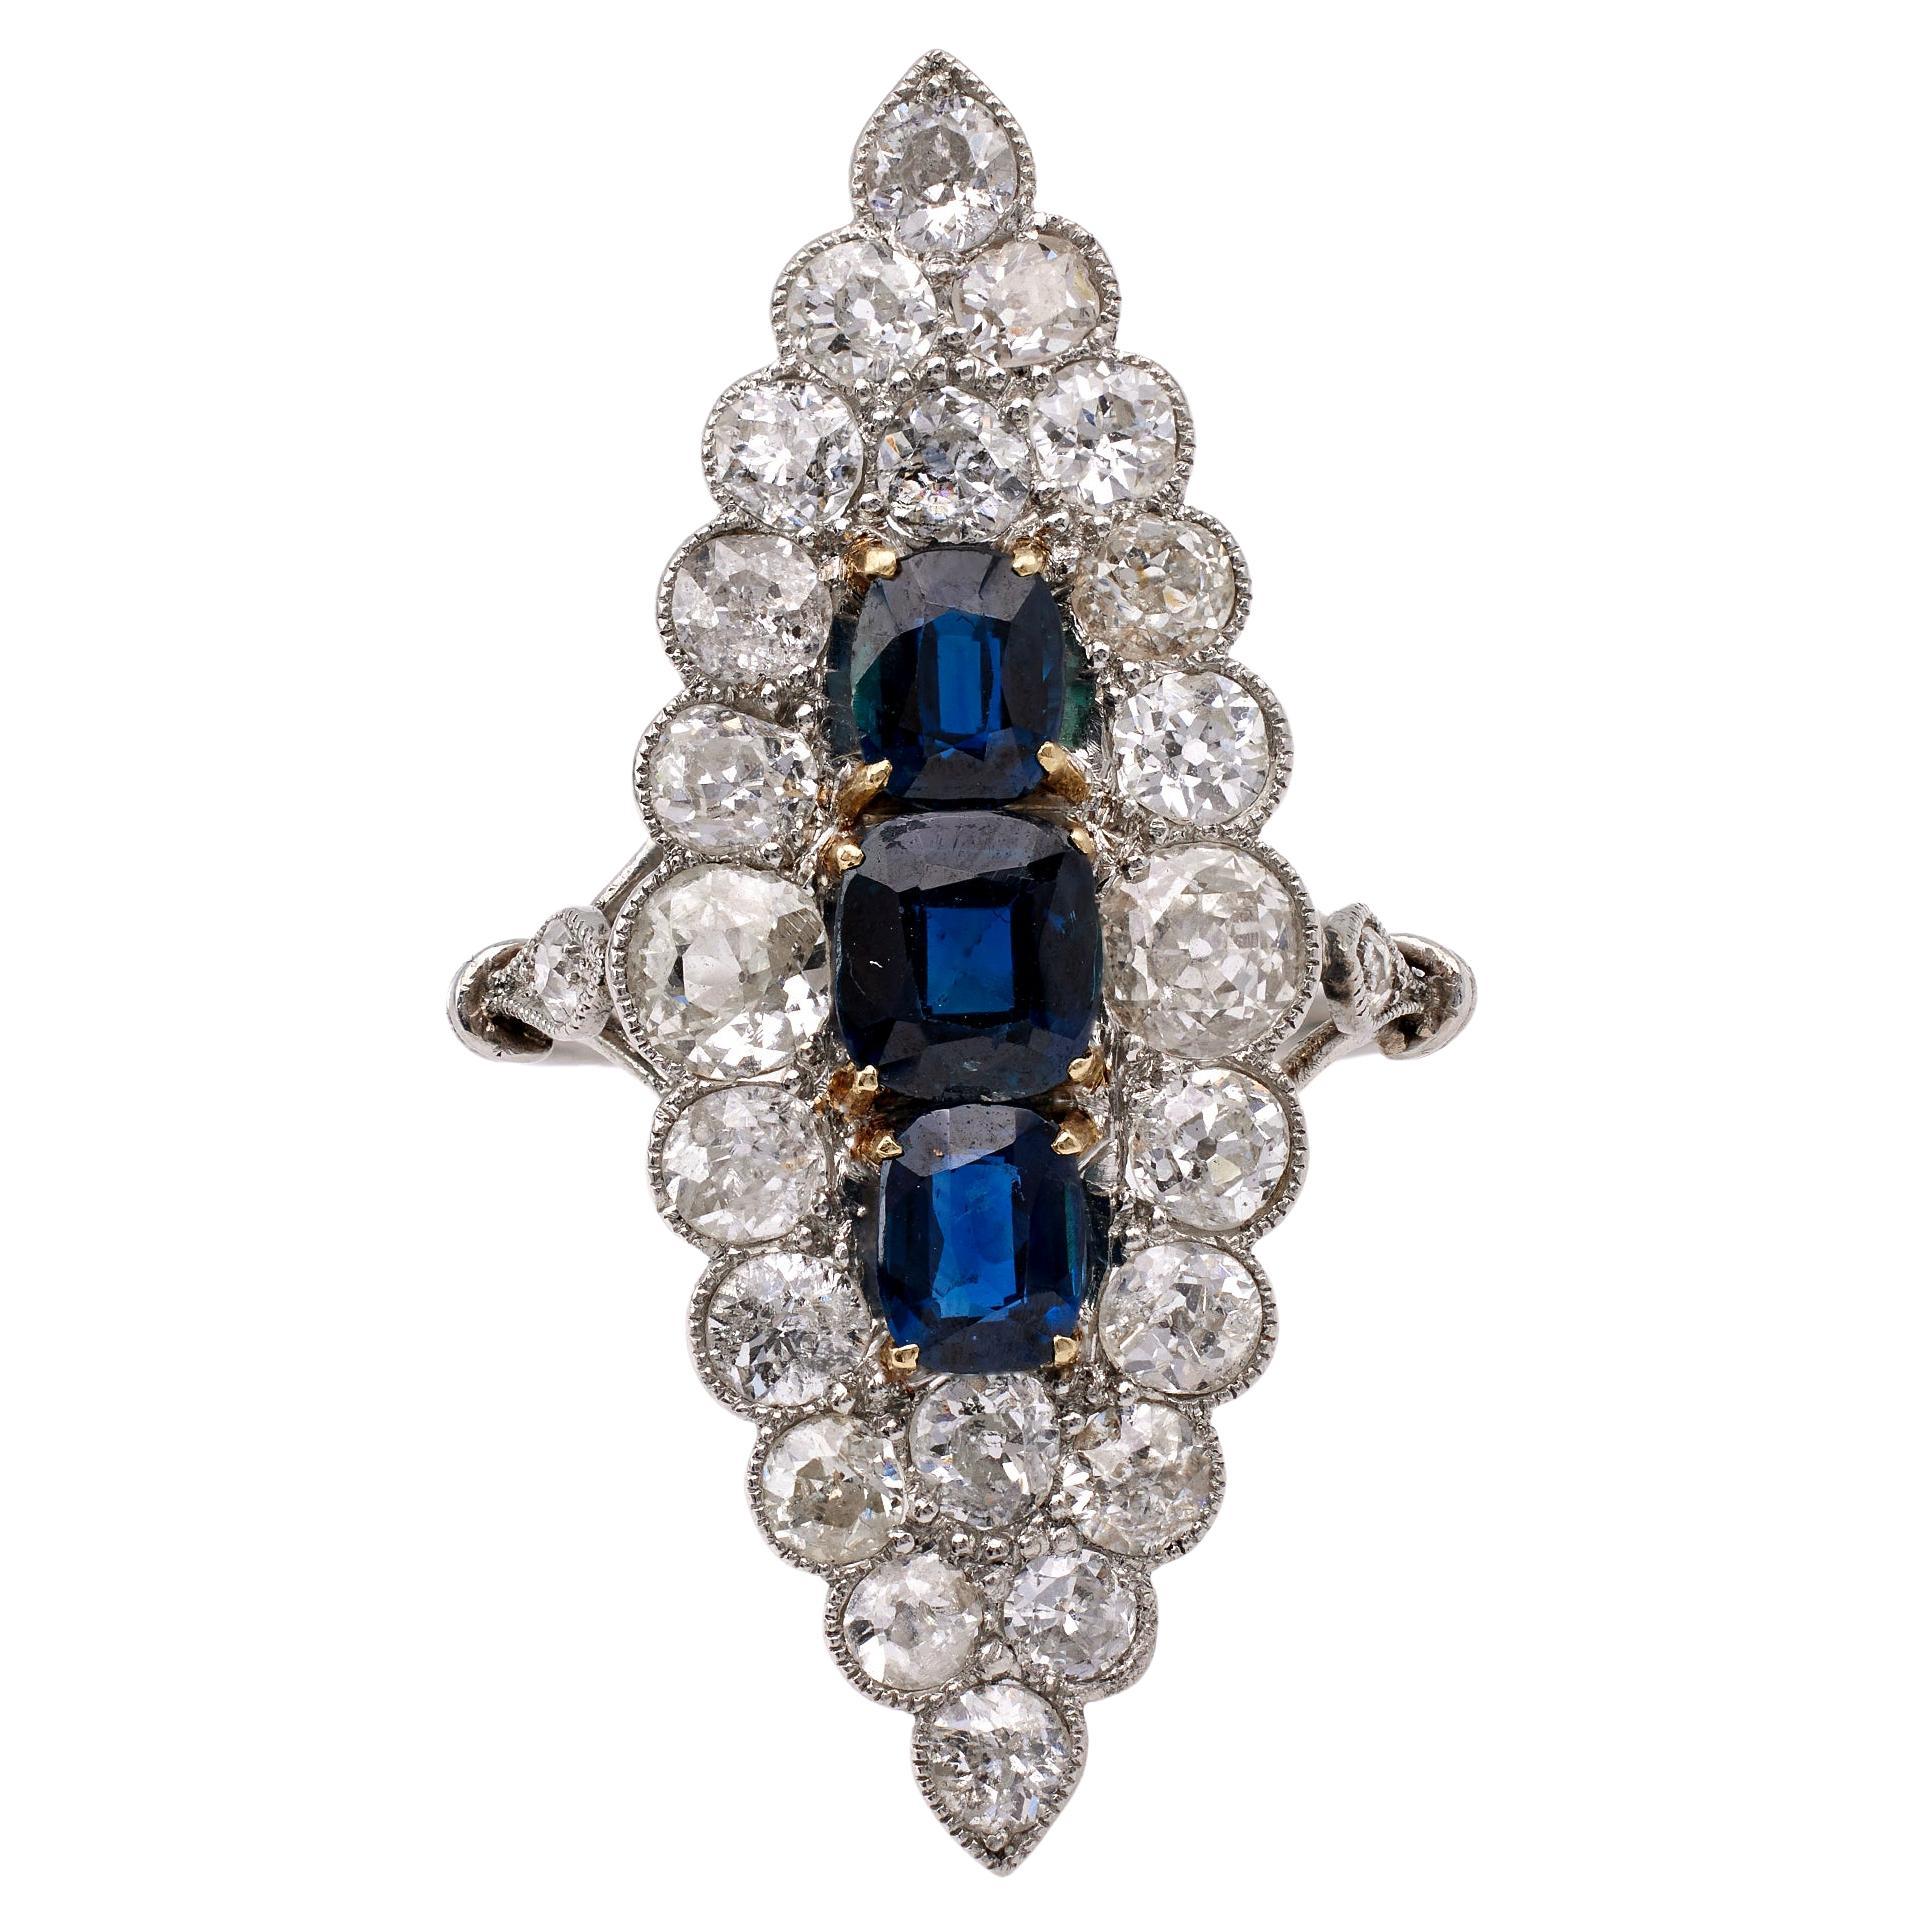 Belle Époque French Sapphire and Diamond Platinum Navette Ring